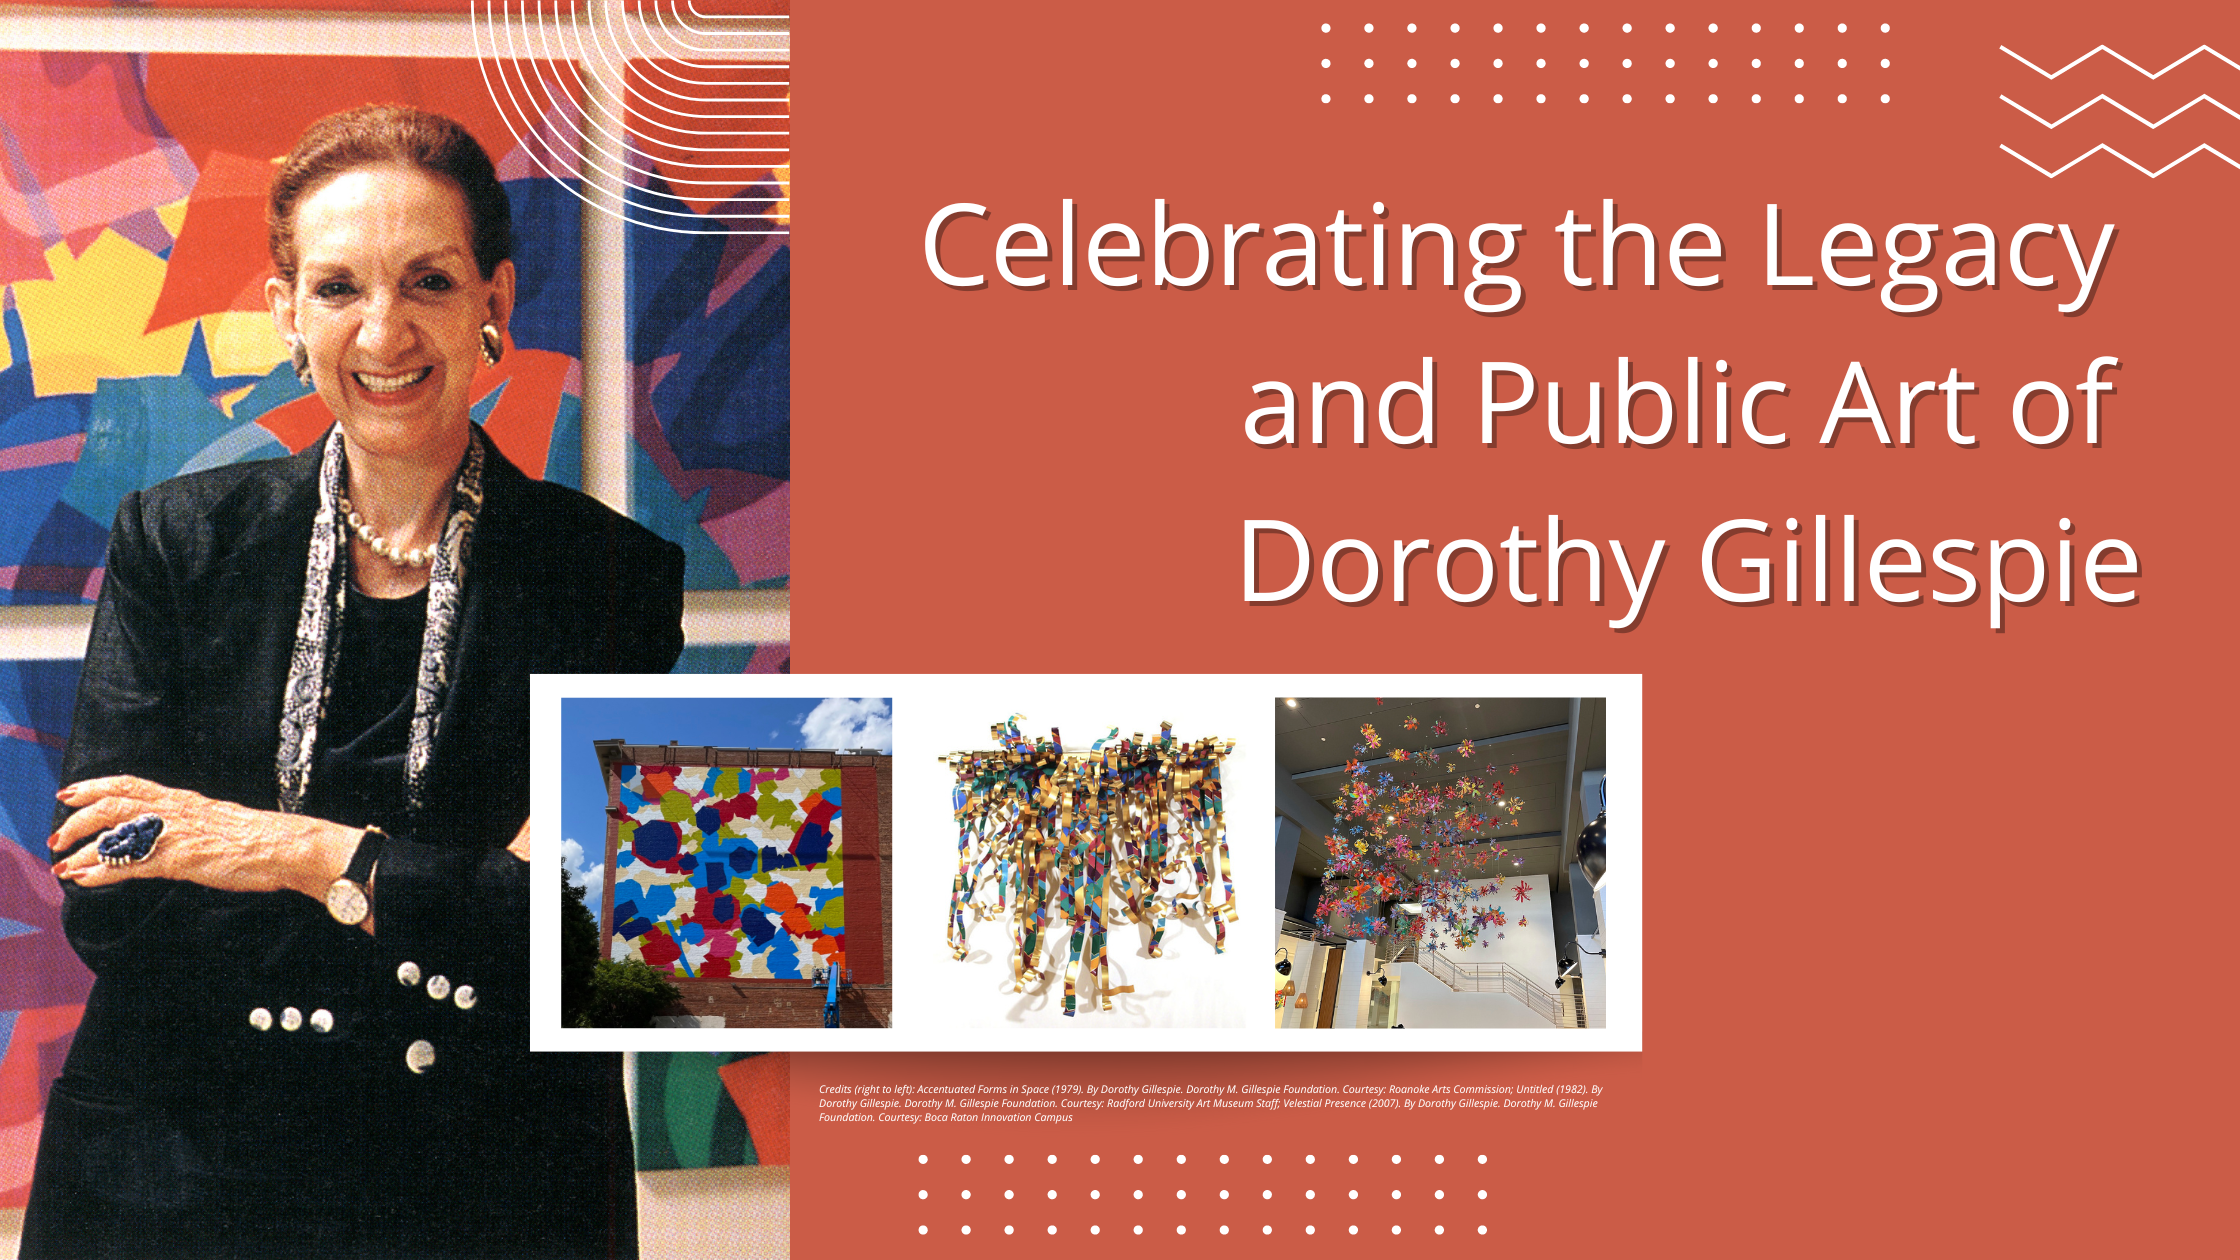 Celebrating the Legacy and Public Art of Dorothy Gillespie